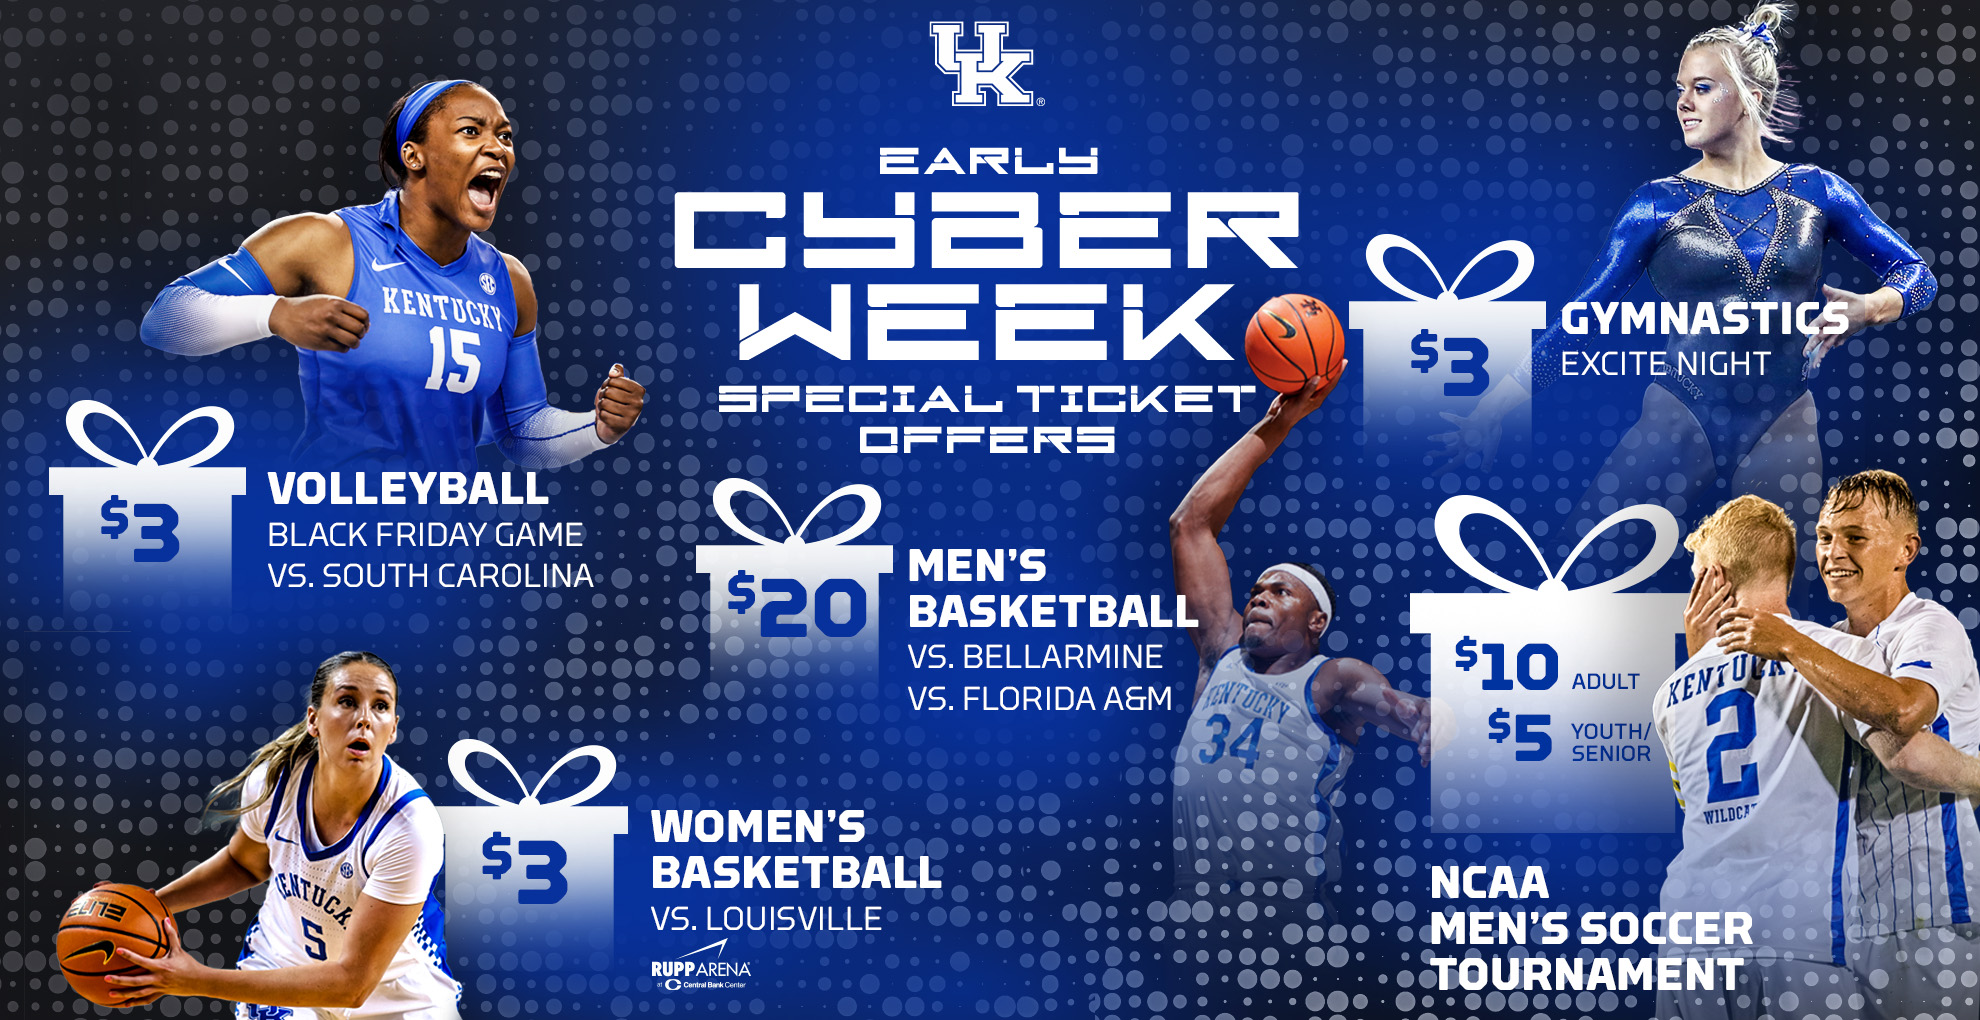 UK Athletics Early Cyber Week Ticket Specials